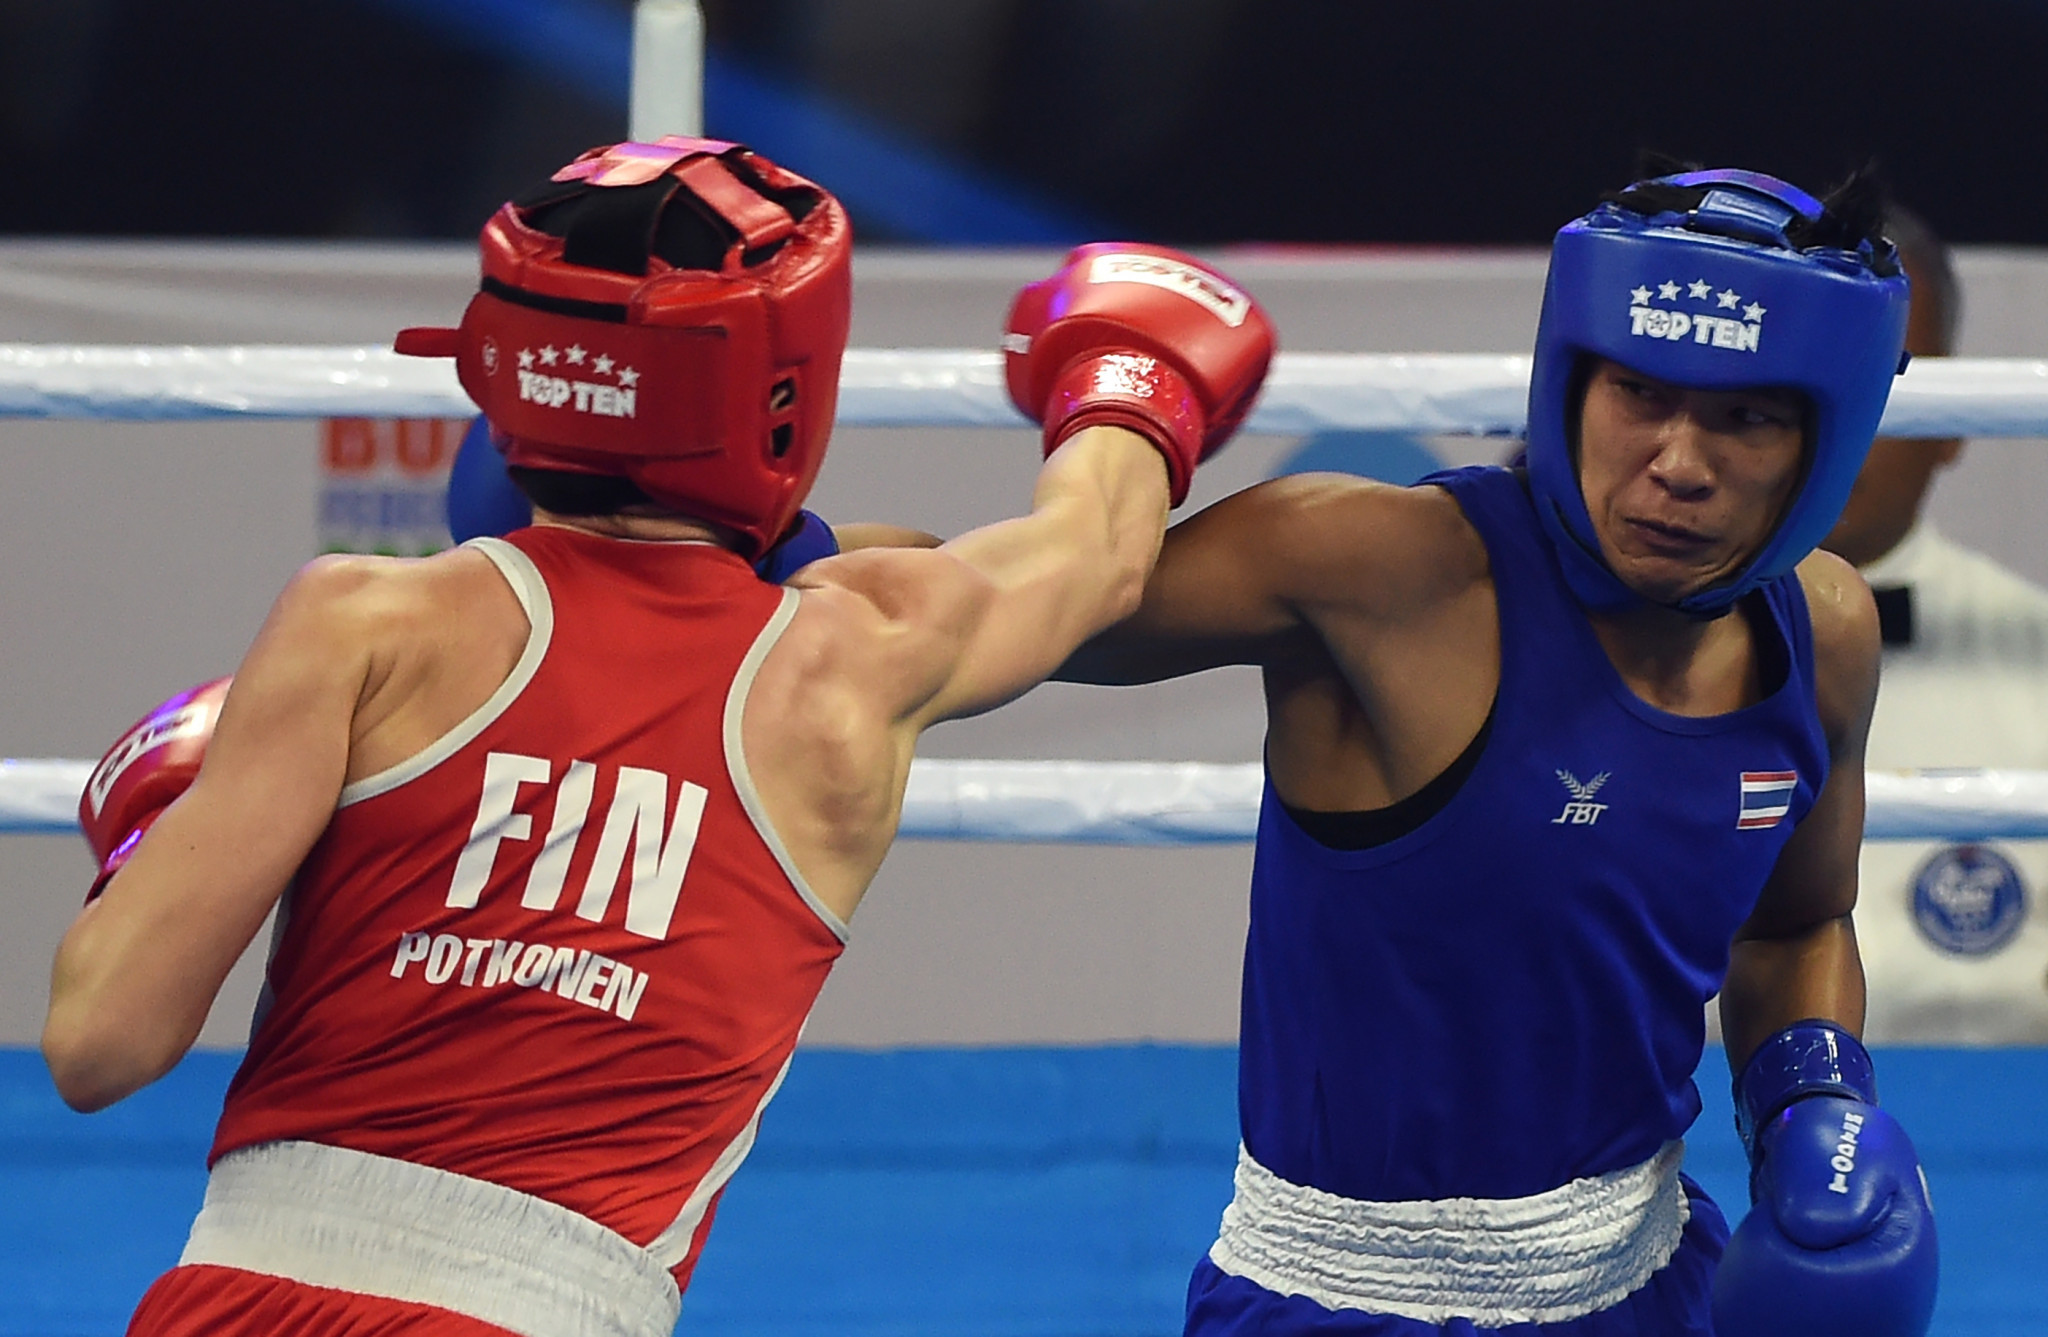 Thailand’s Sudaporn Seesondee upset Finland's Mira Potkonen to secure her place in the lightweight semi-finals on day six of the 2018 AIBA Women's World Championships in New Delhi ©Getty Images